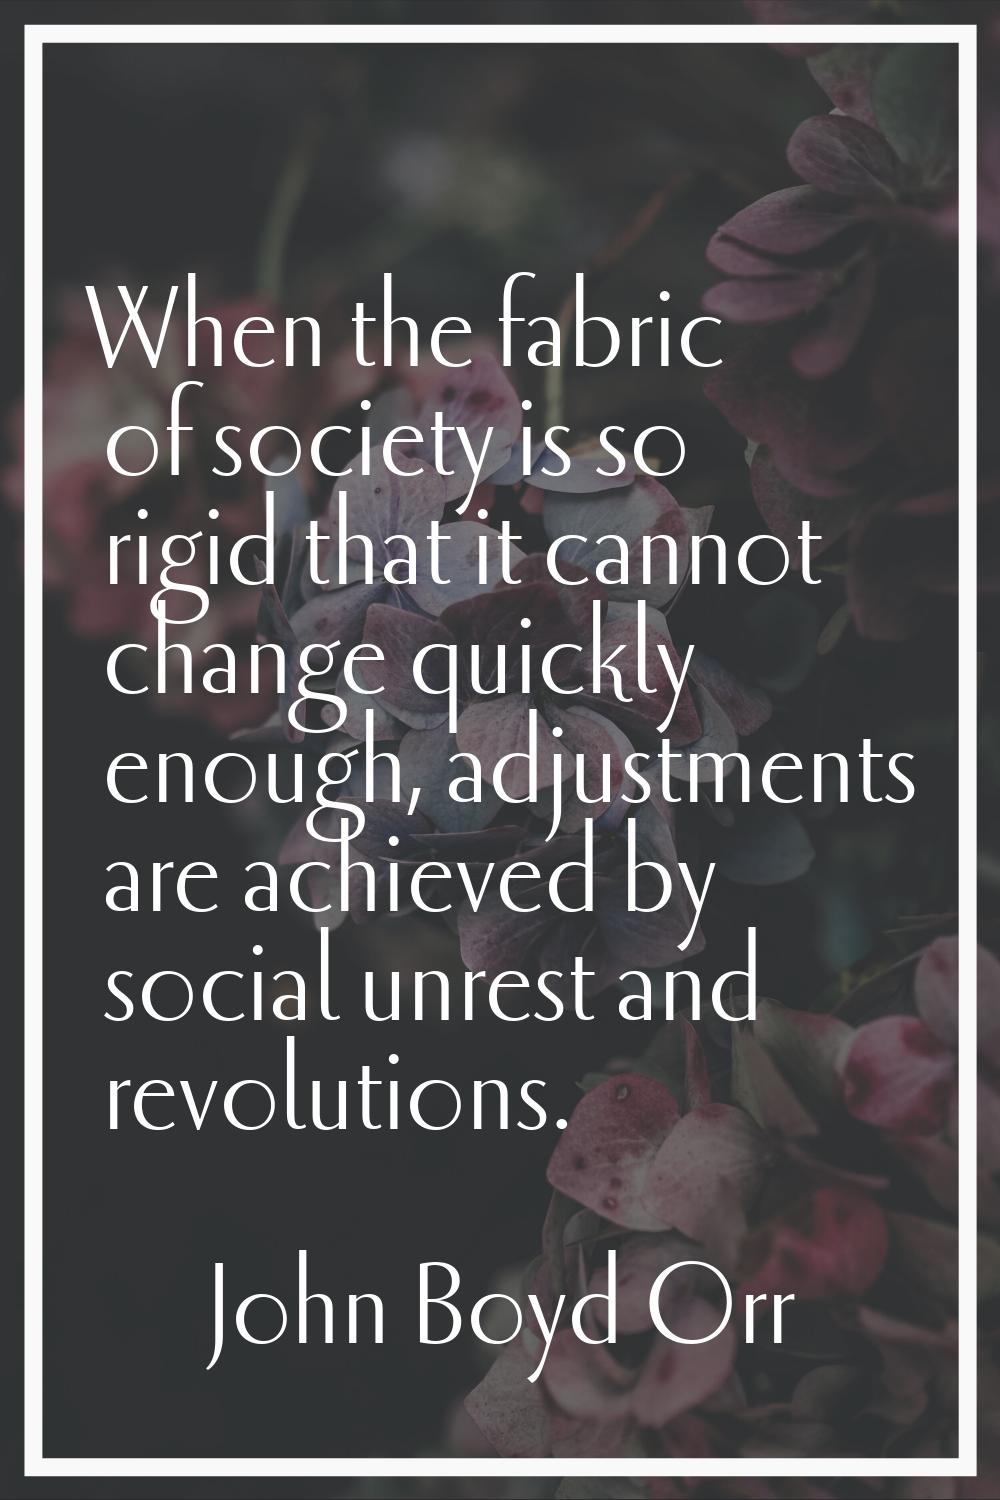 When the fabric of society is so rigid that it cannot change quickly enough, adjustments are achiev